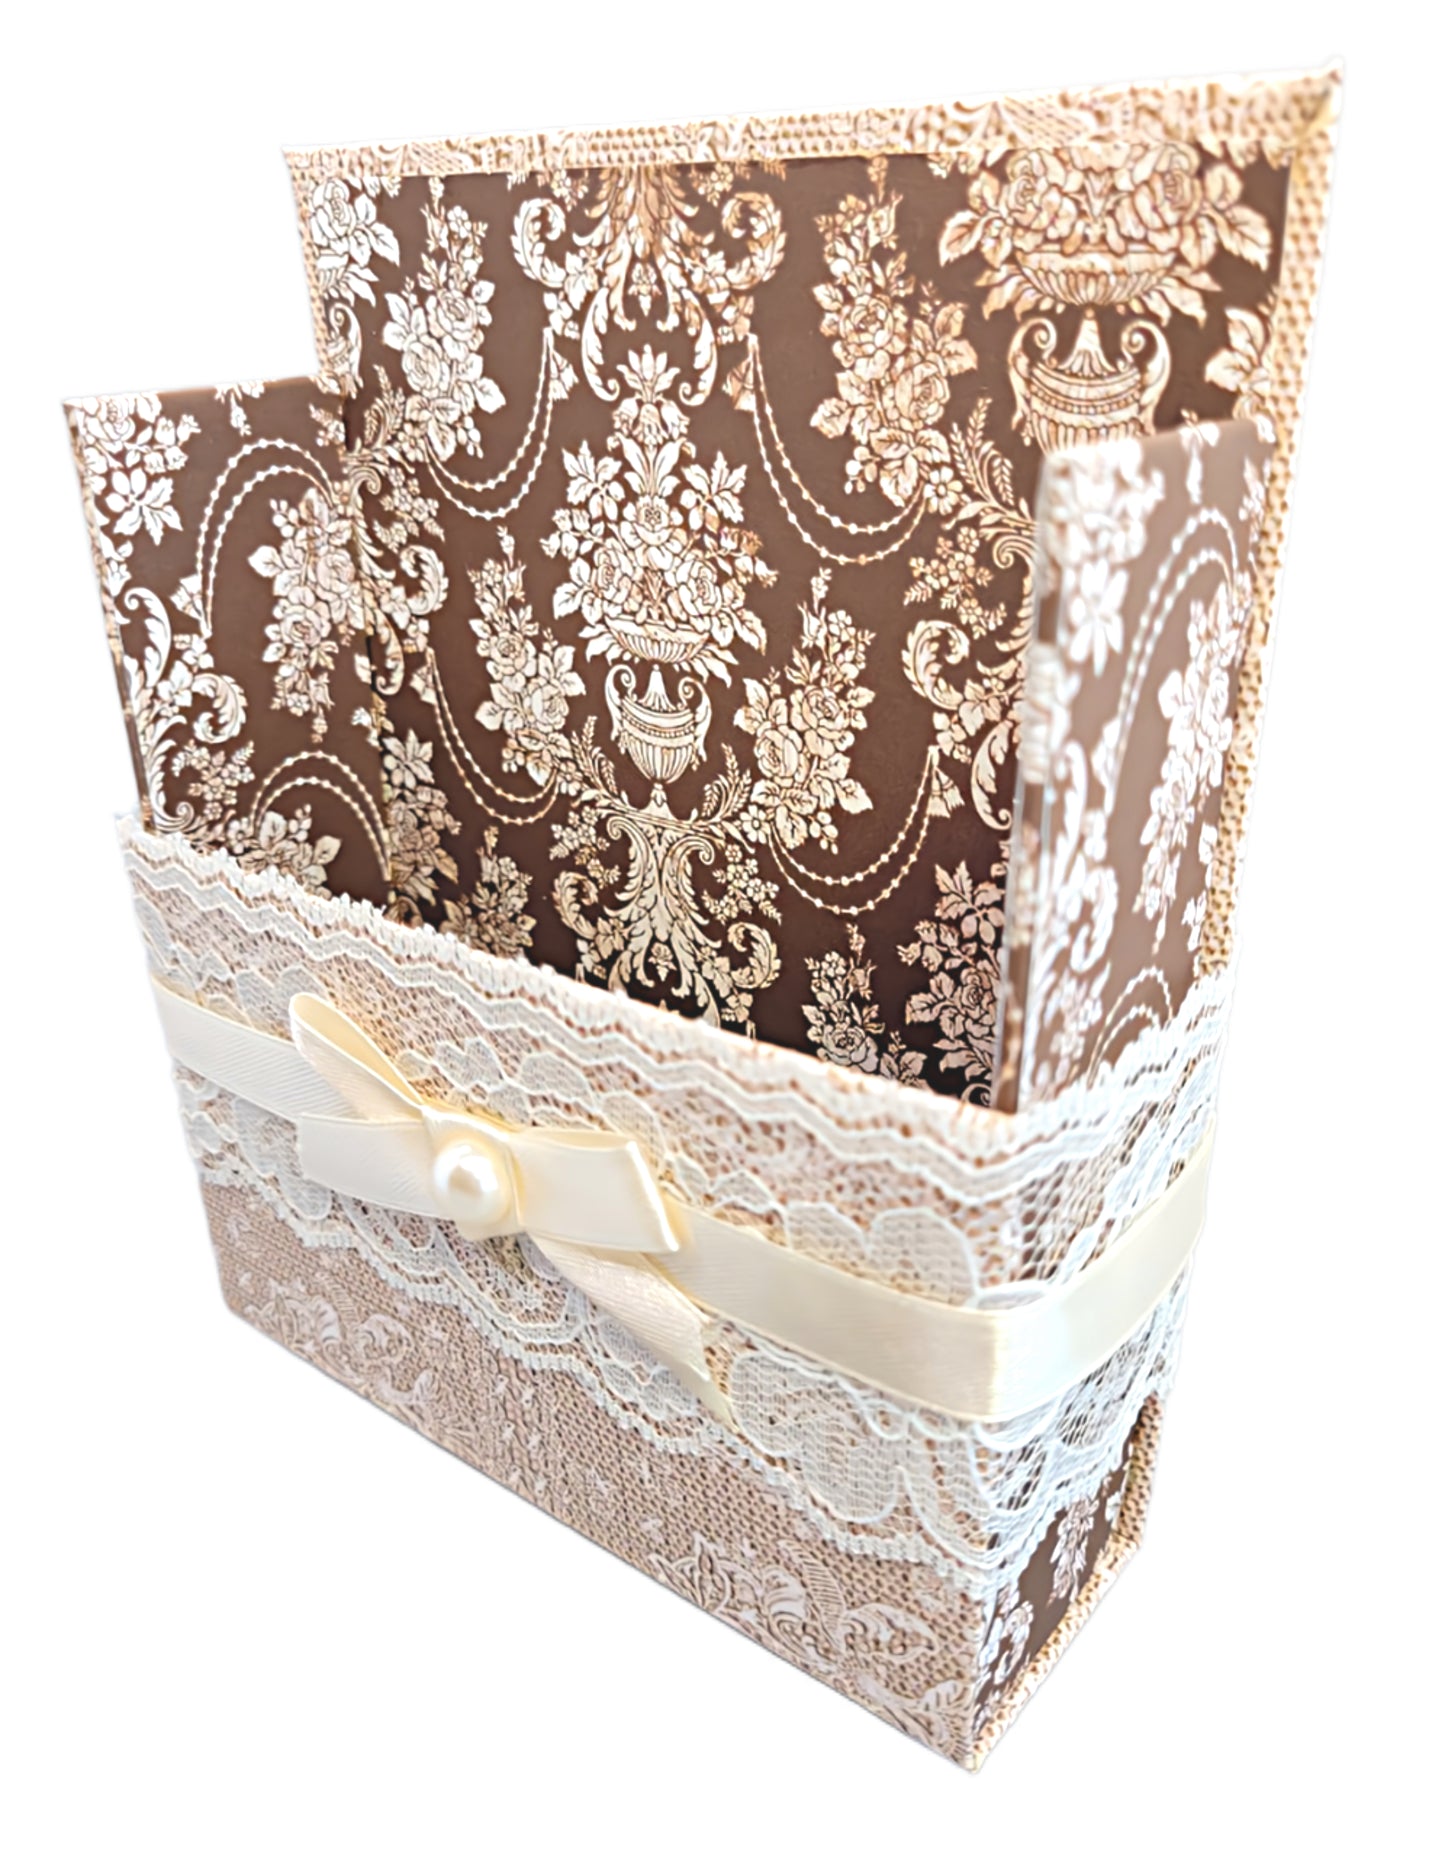 42-Pc Stationery Gift Box Set w/Reusable Desktop Organizer Box and Gold Pen - Ivory & Brown Vintage Lace - Chic Brico